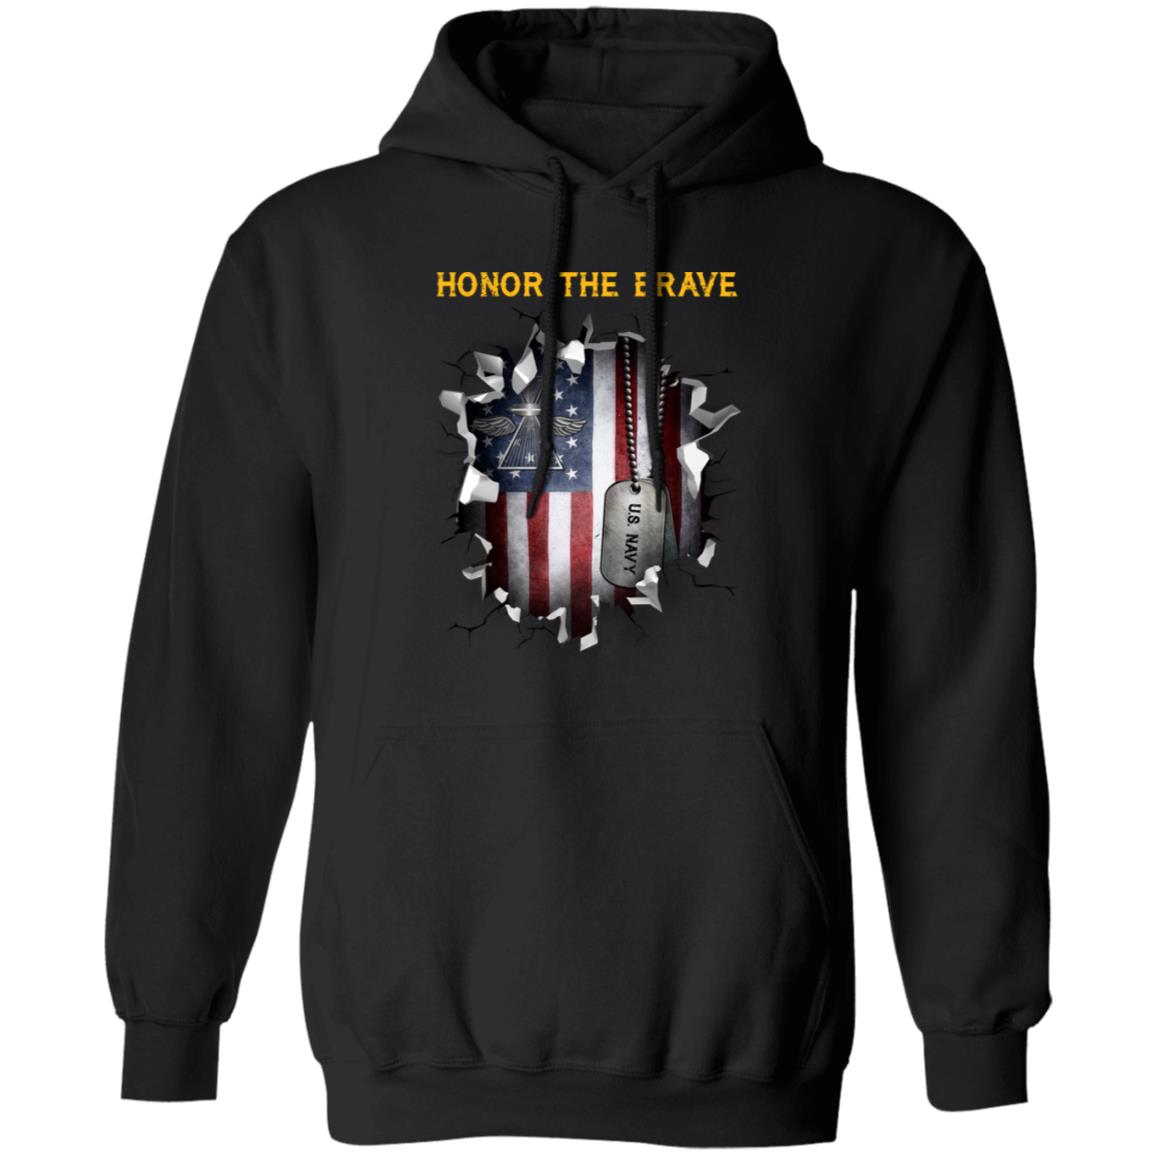 U.S Navy Photographer_s Mate Navy PH - Honor The Brave Front Shirt